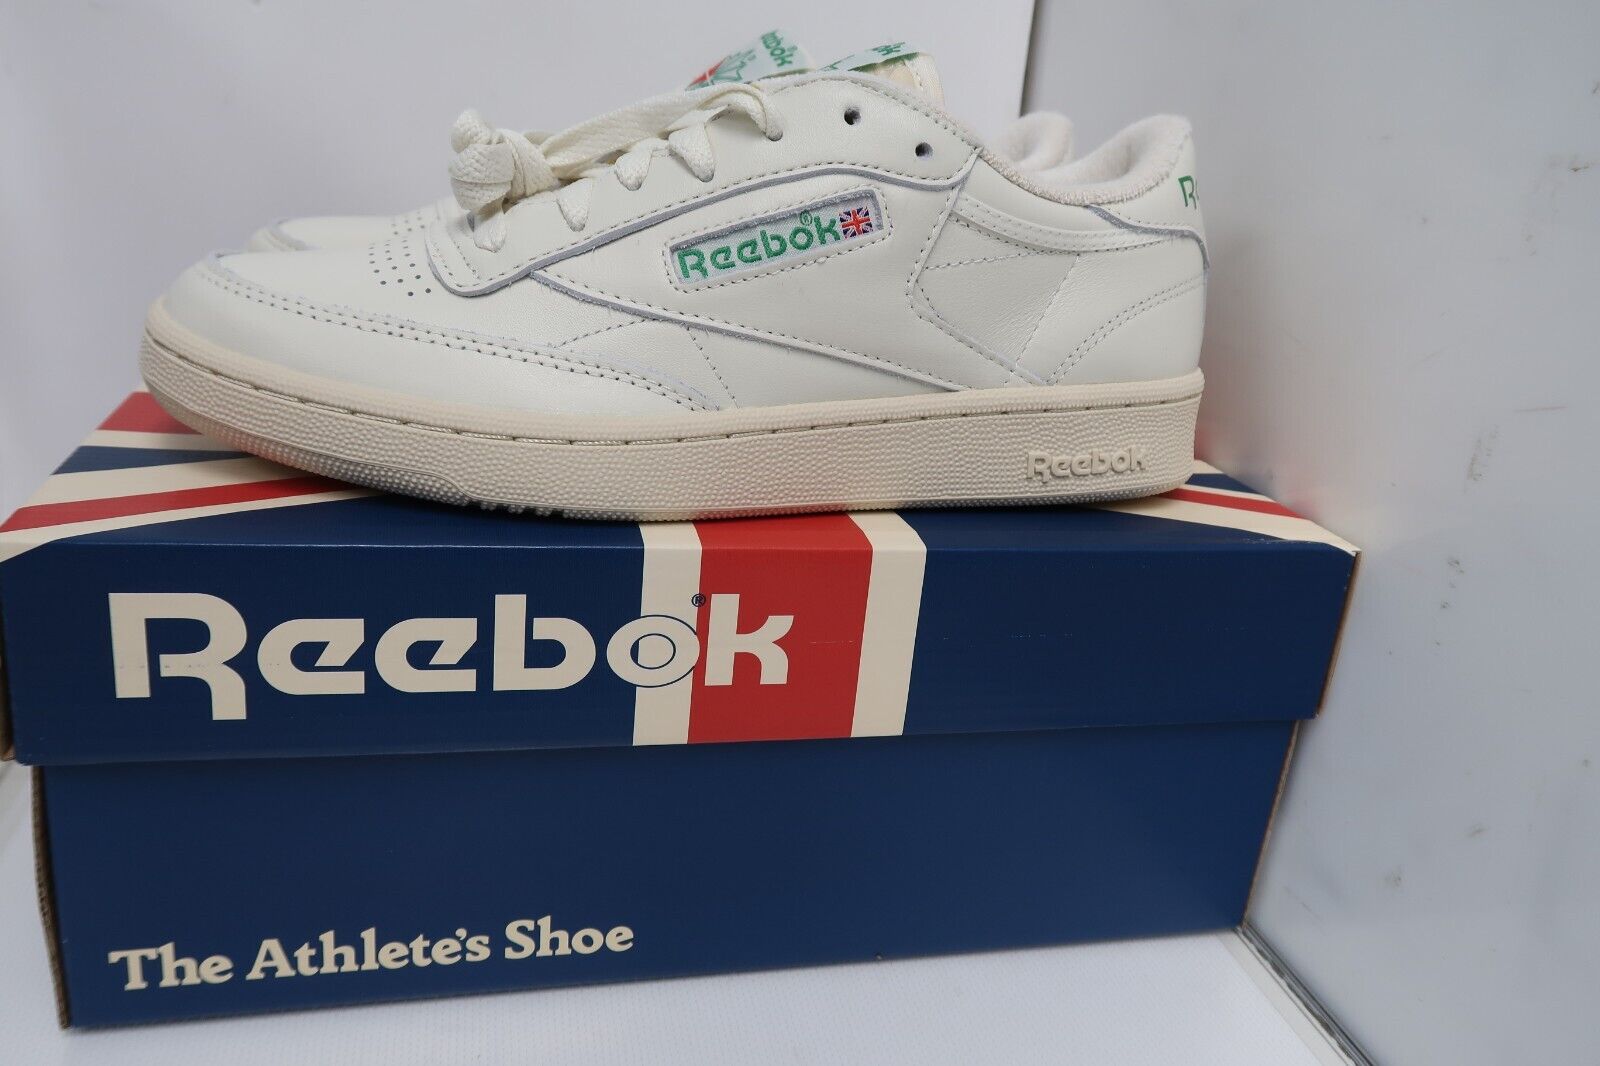 What Box Does Reebok Club C 85 Come in?